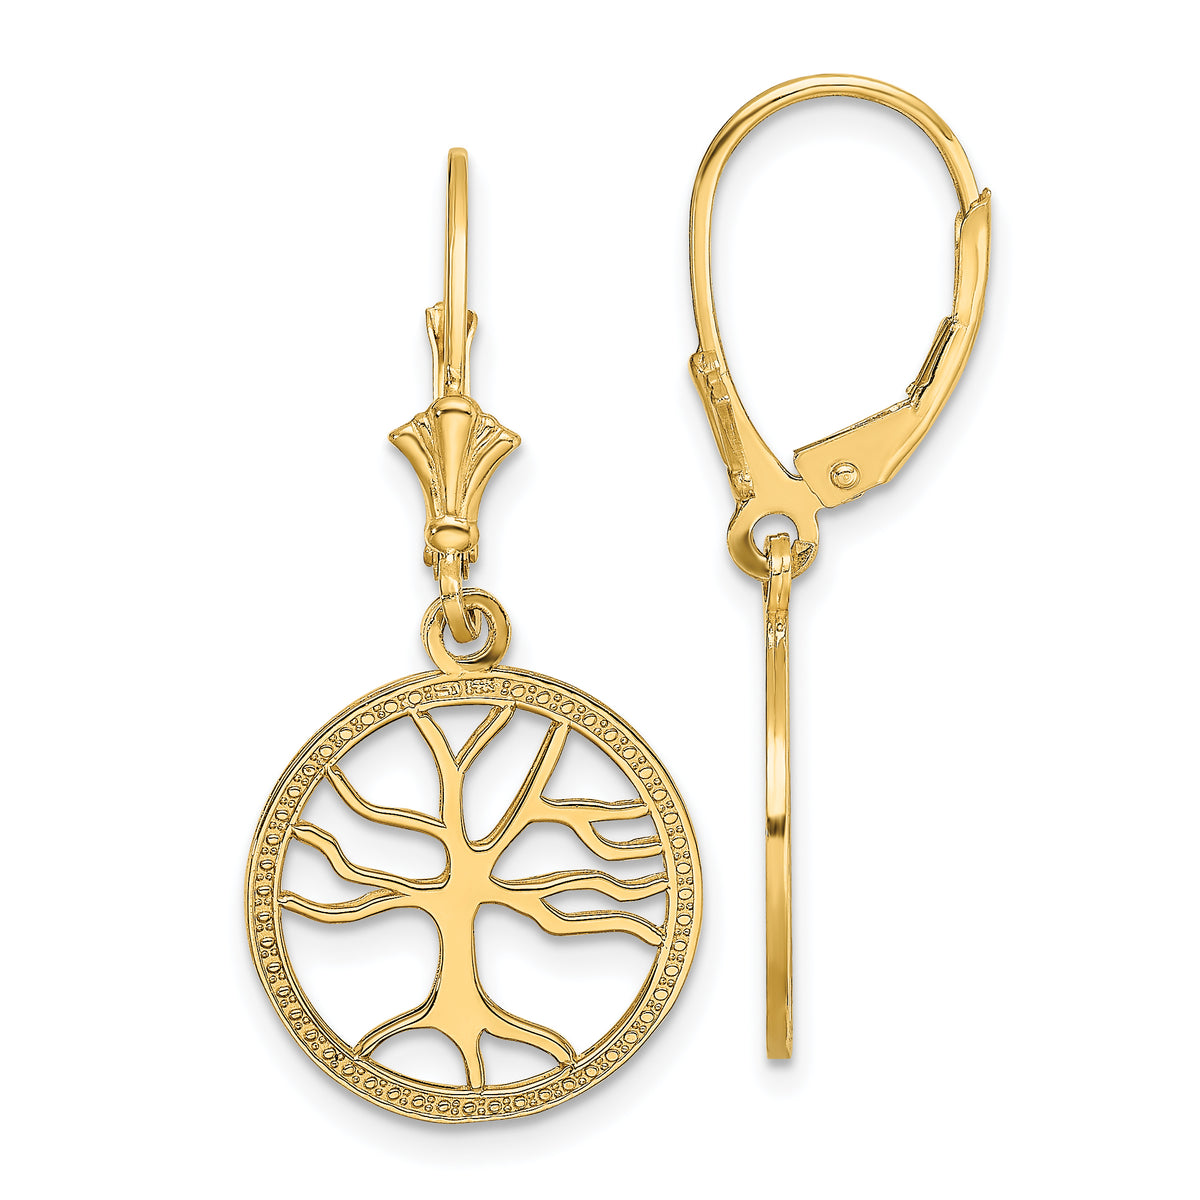 10K Tree of Life In Round Frame Leverback Earrings